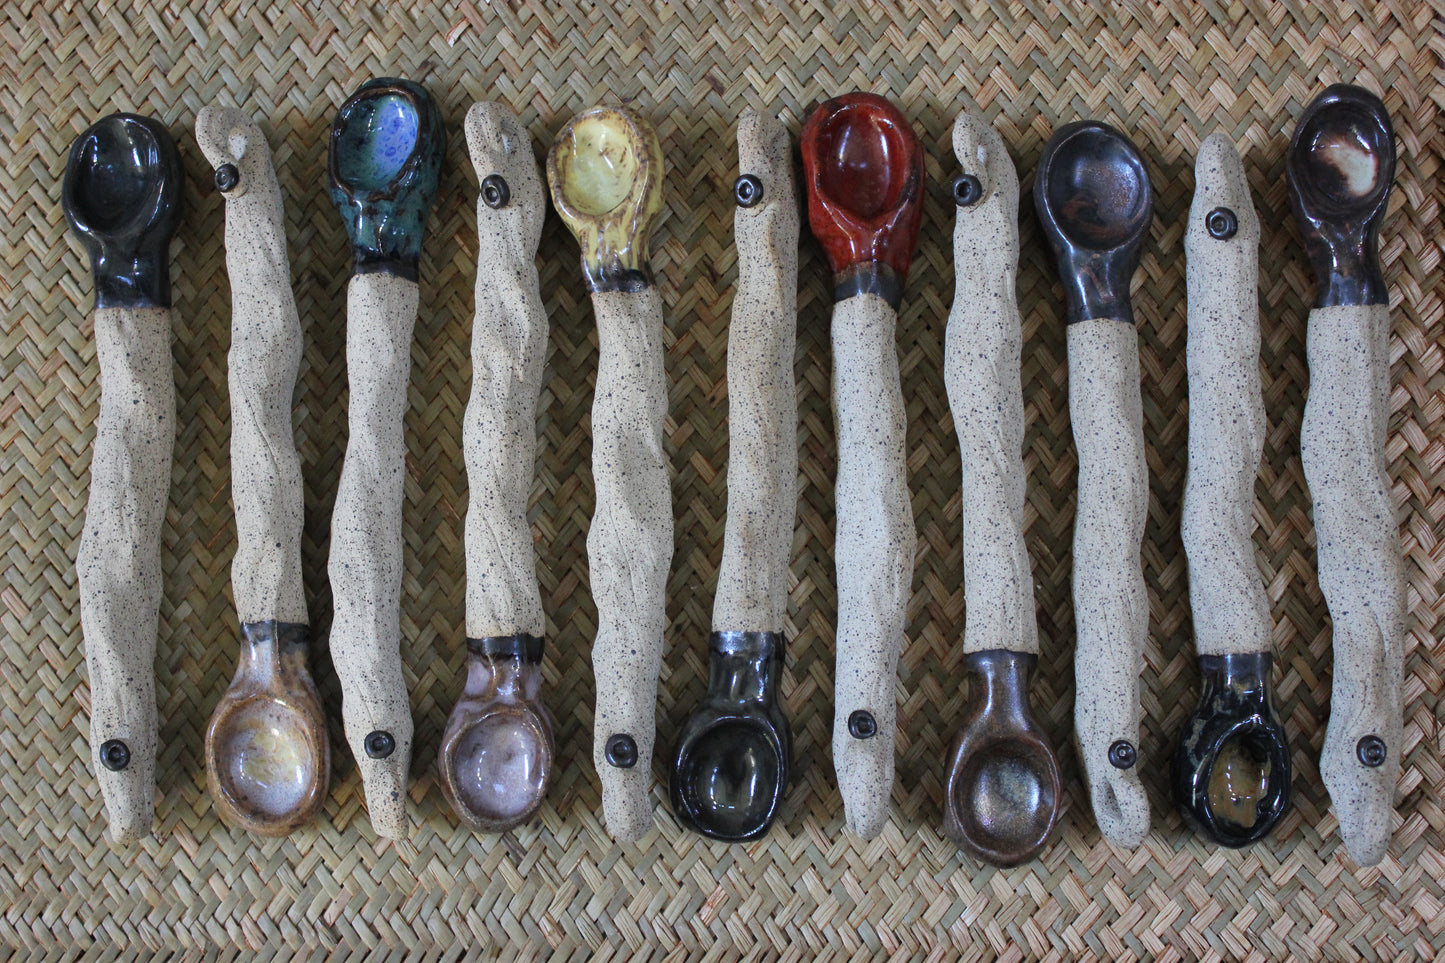 Earthy Ceramic Red-Brown Serving Spoon as a Unique Ornament or for Food Consumption